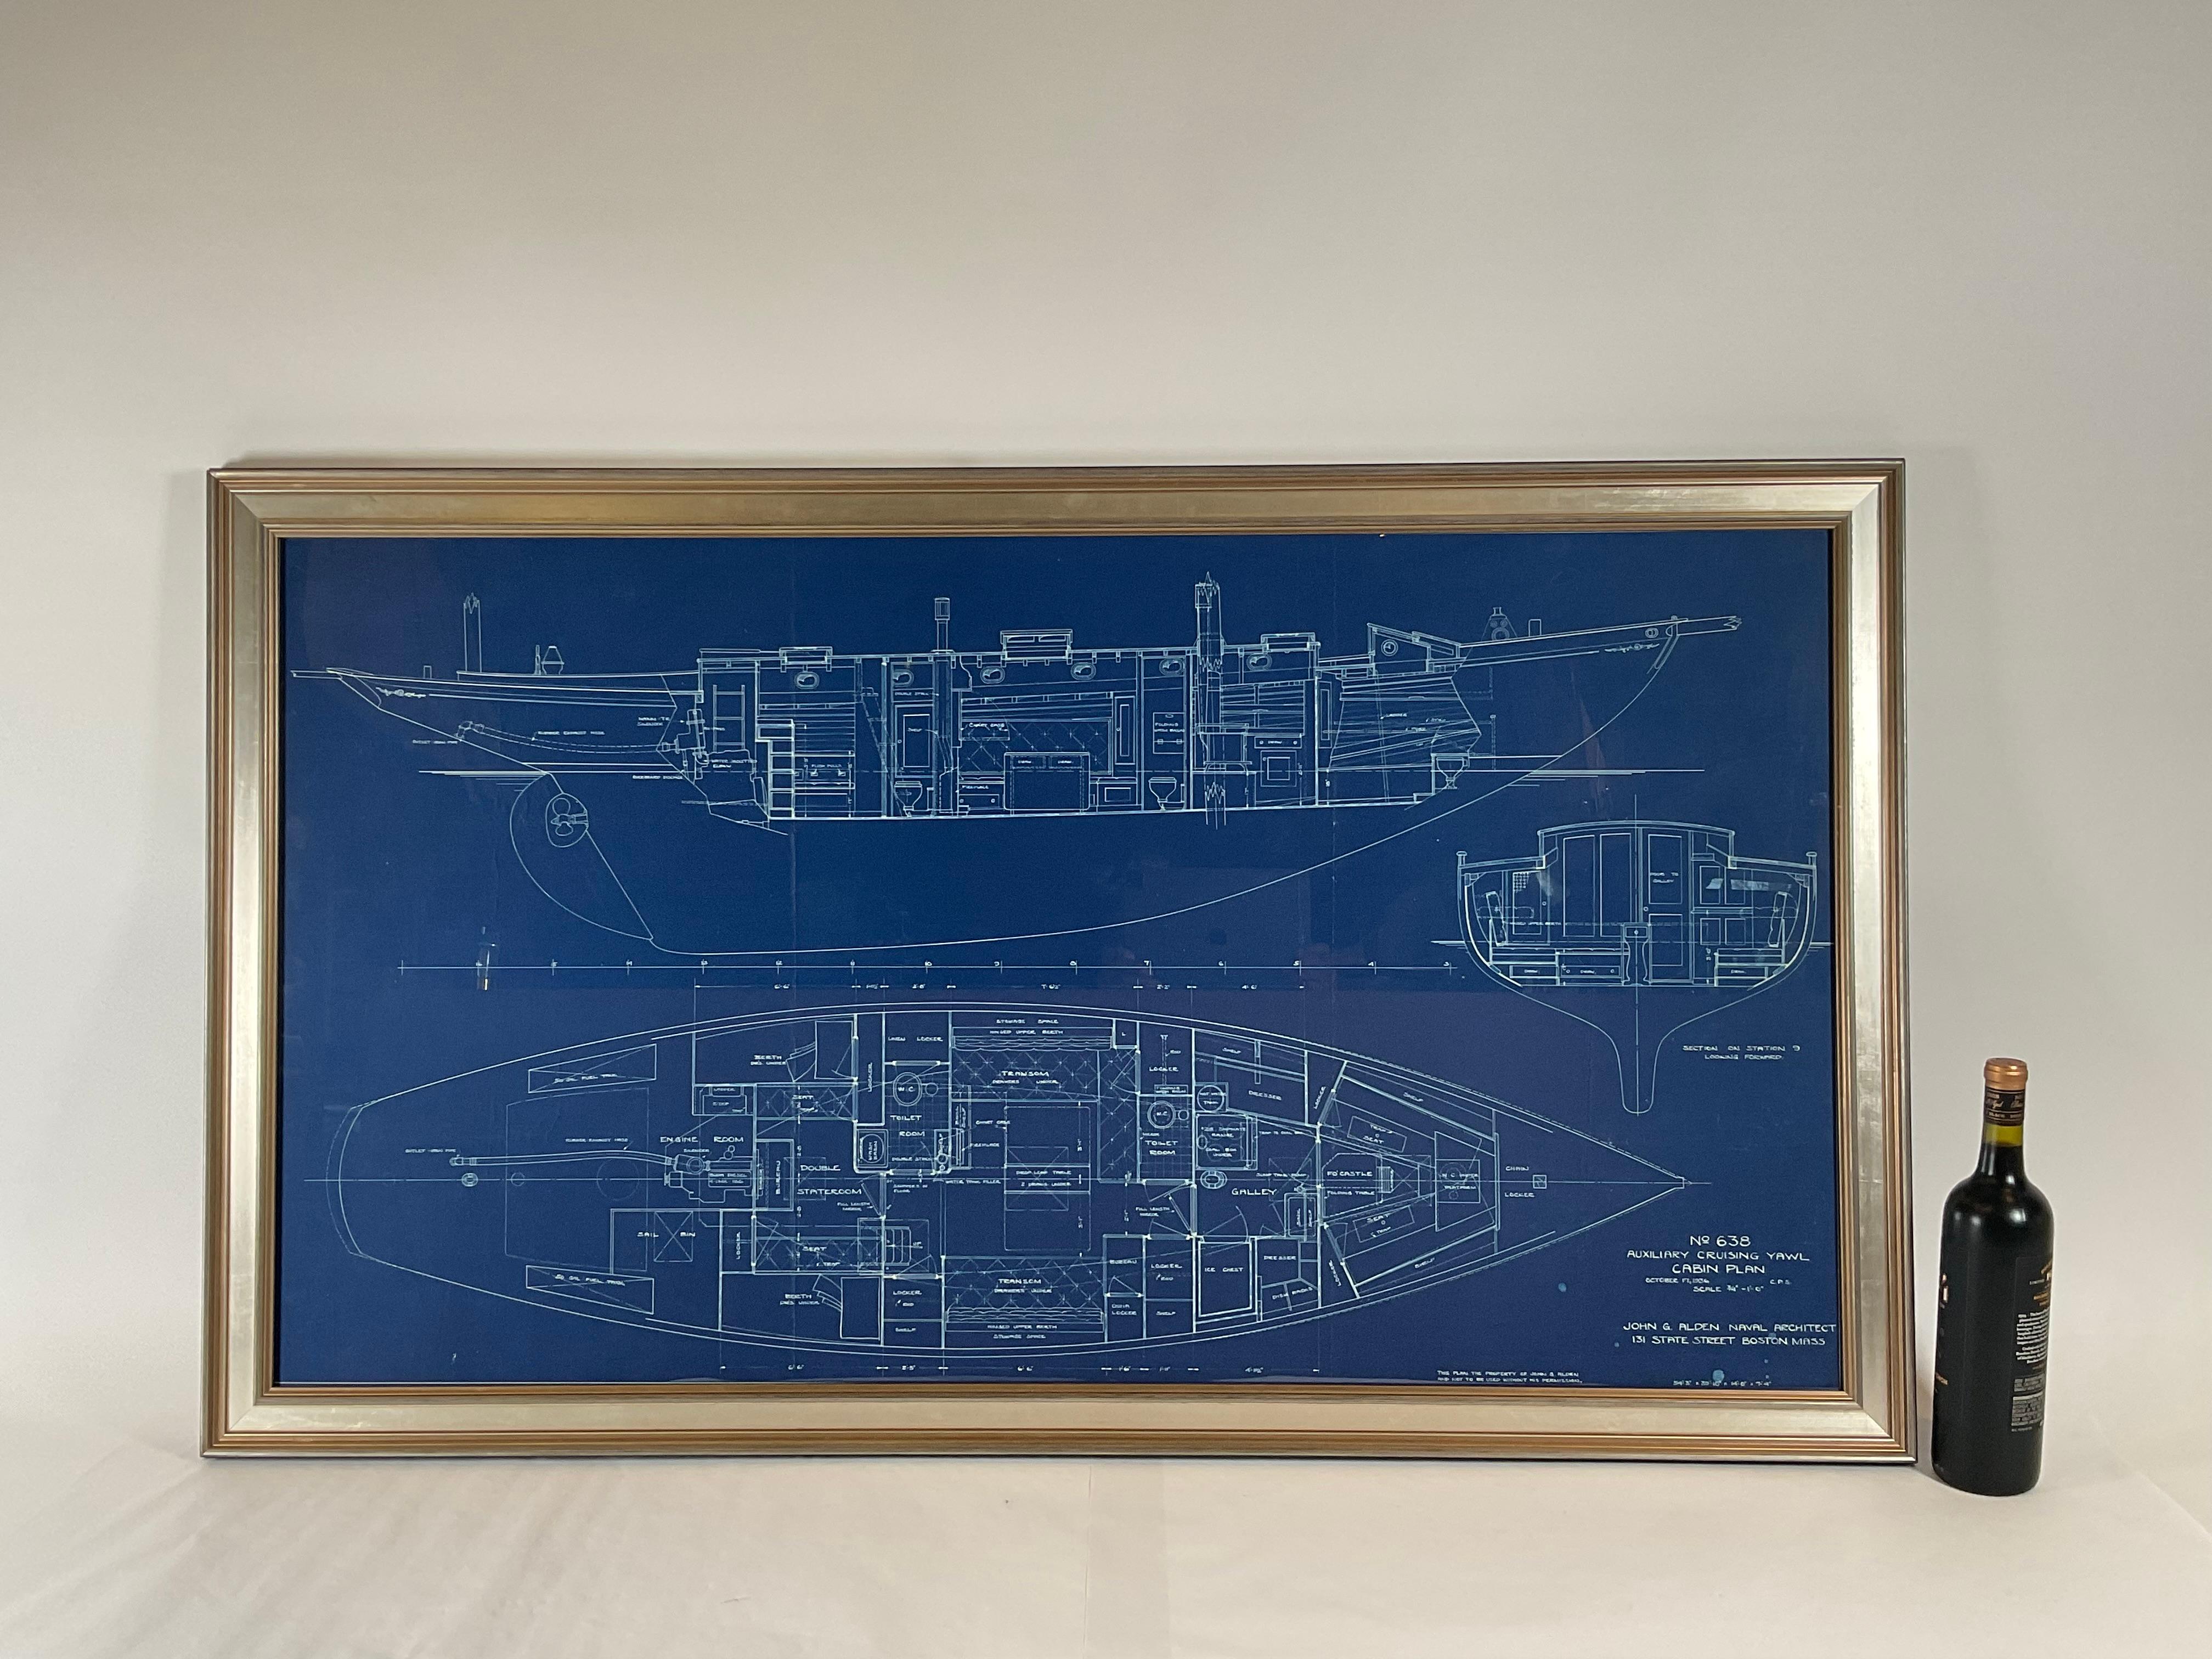 Original construction plan drawing from John G. Alden naval architect of the schooner yacht Evening Star, hull 638. Evening Star was the last yacht built under the eyes of Nathanael Herreshoff, the end of an era. This is a big, beautiful deck plan